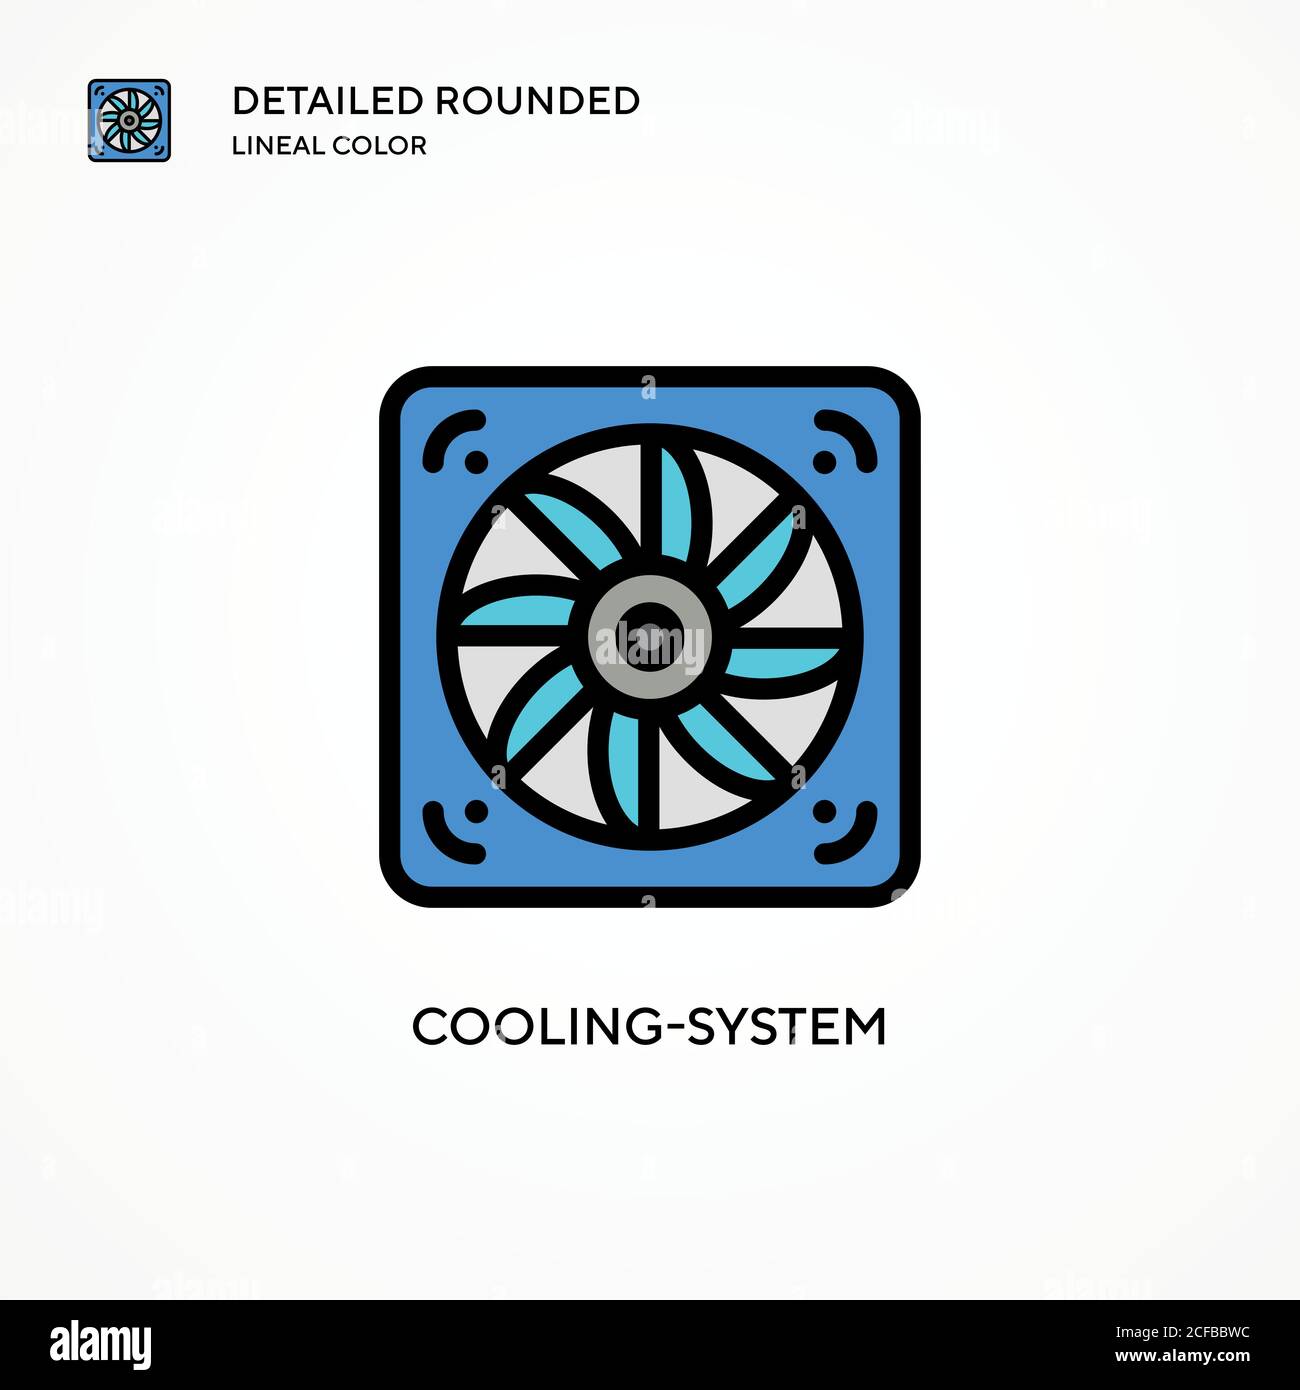 Cooling-system vector icon. Modern vector illustration concepts. Easy to edit and customize. Stock Vector